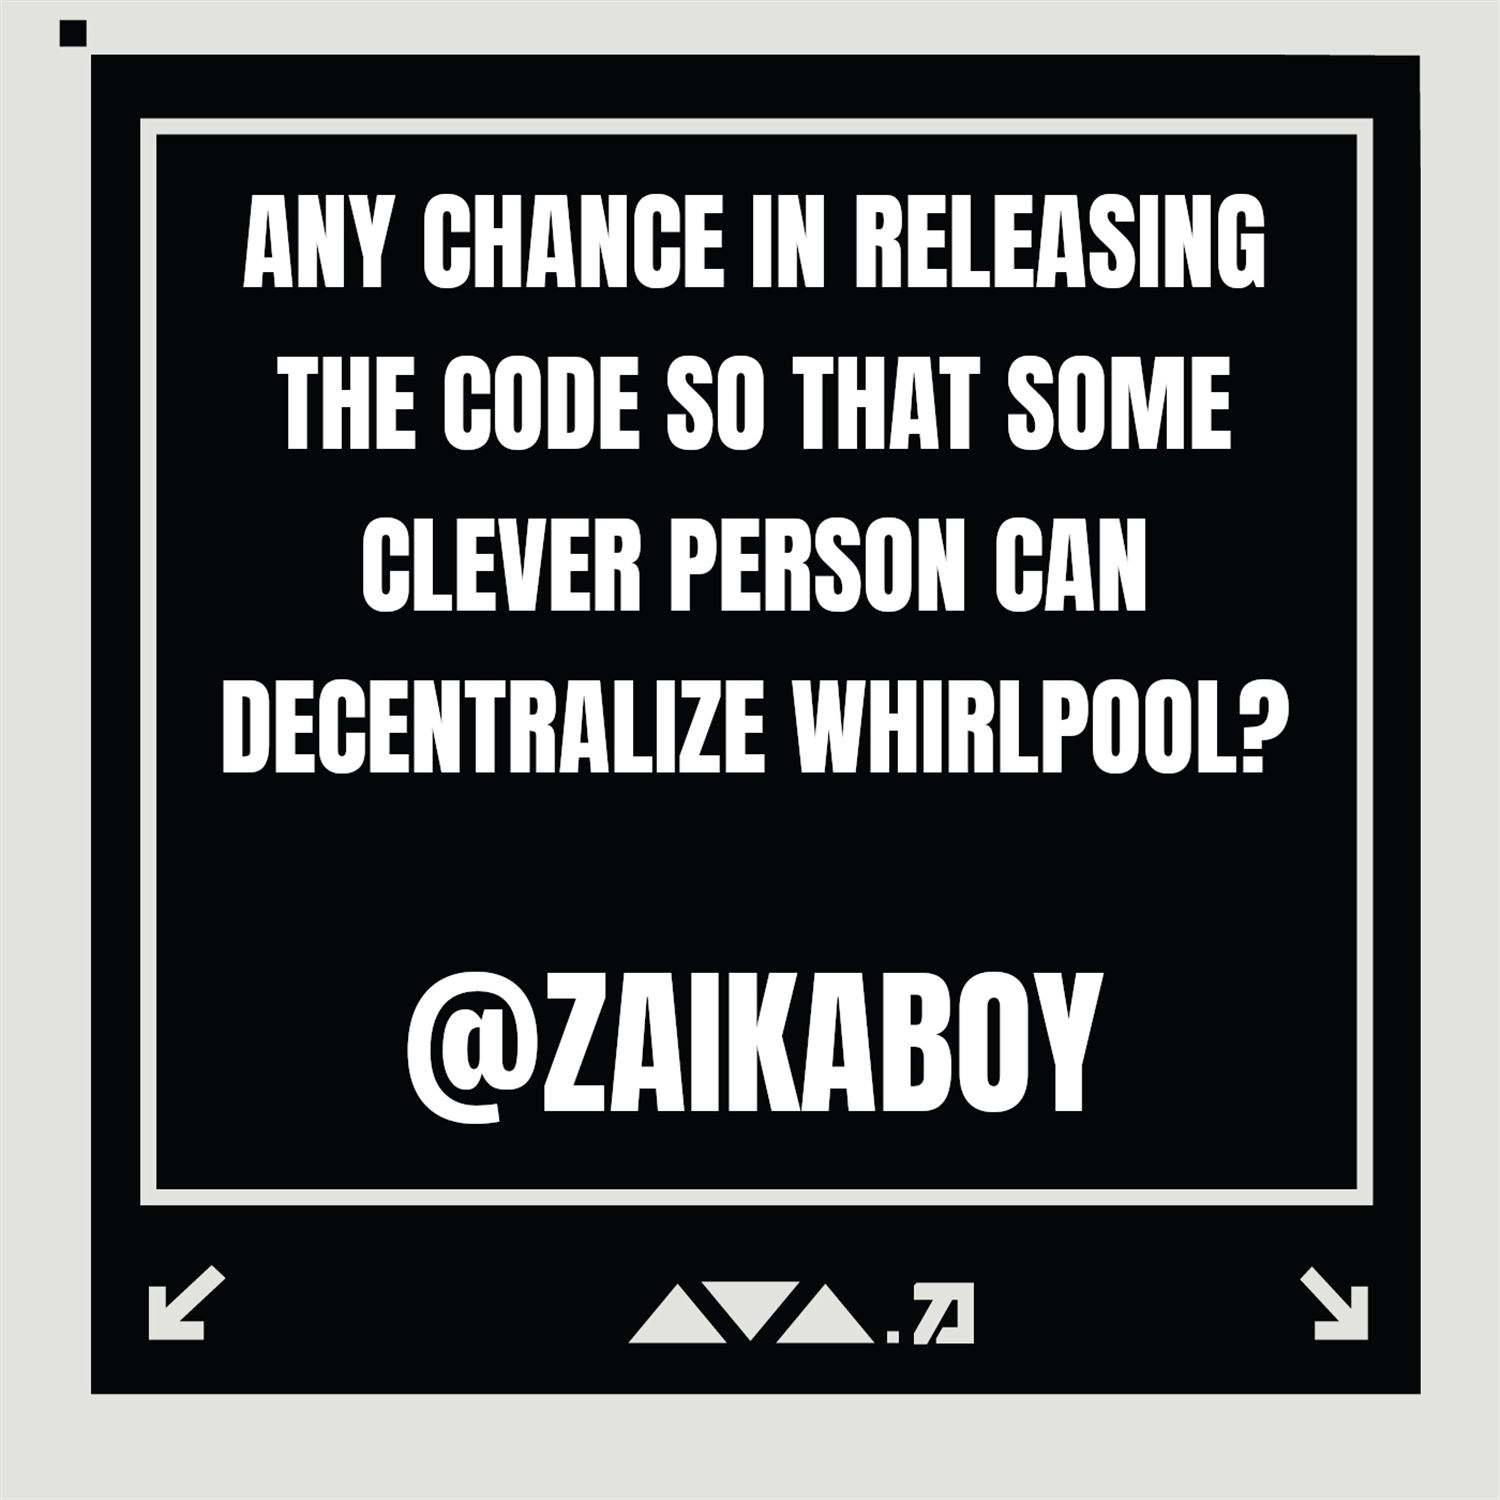 Q2: Release the Code